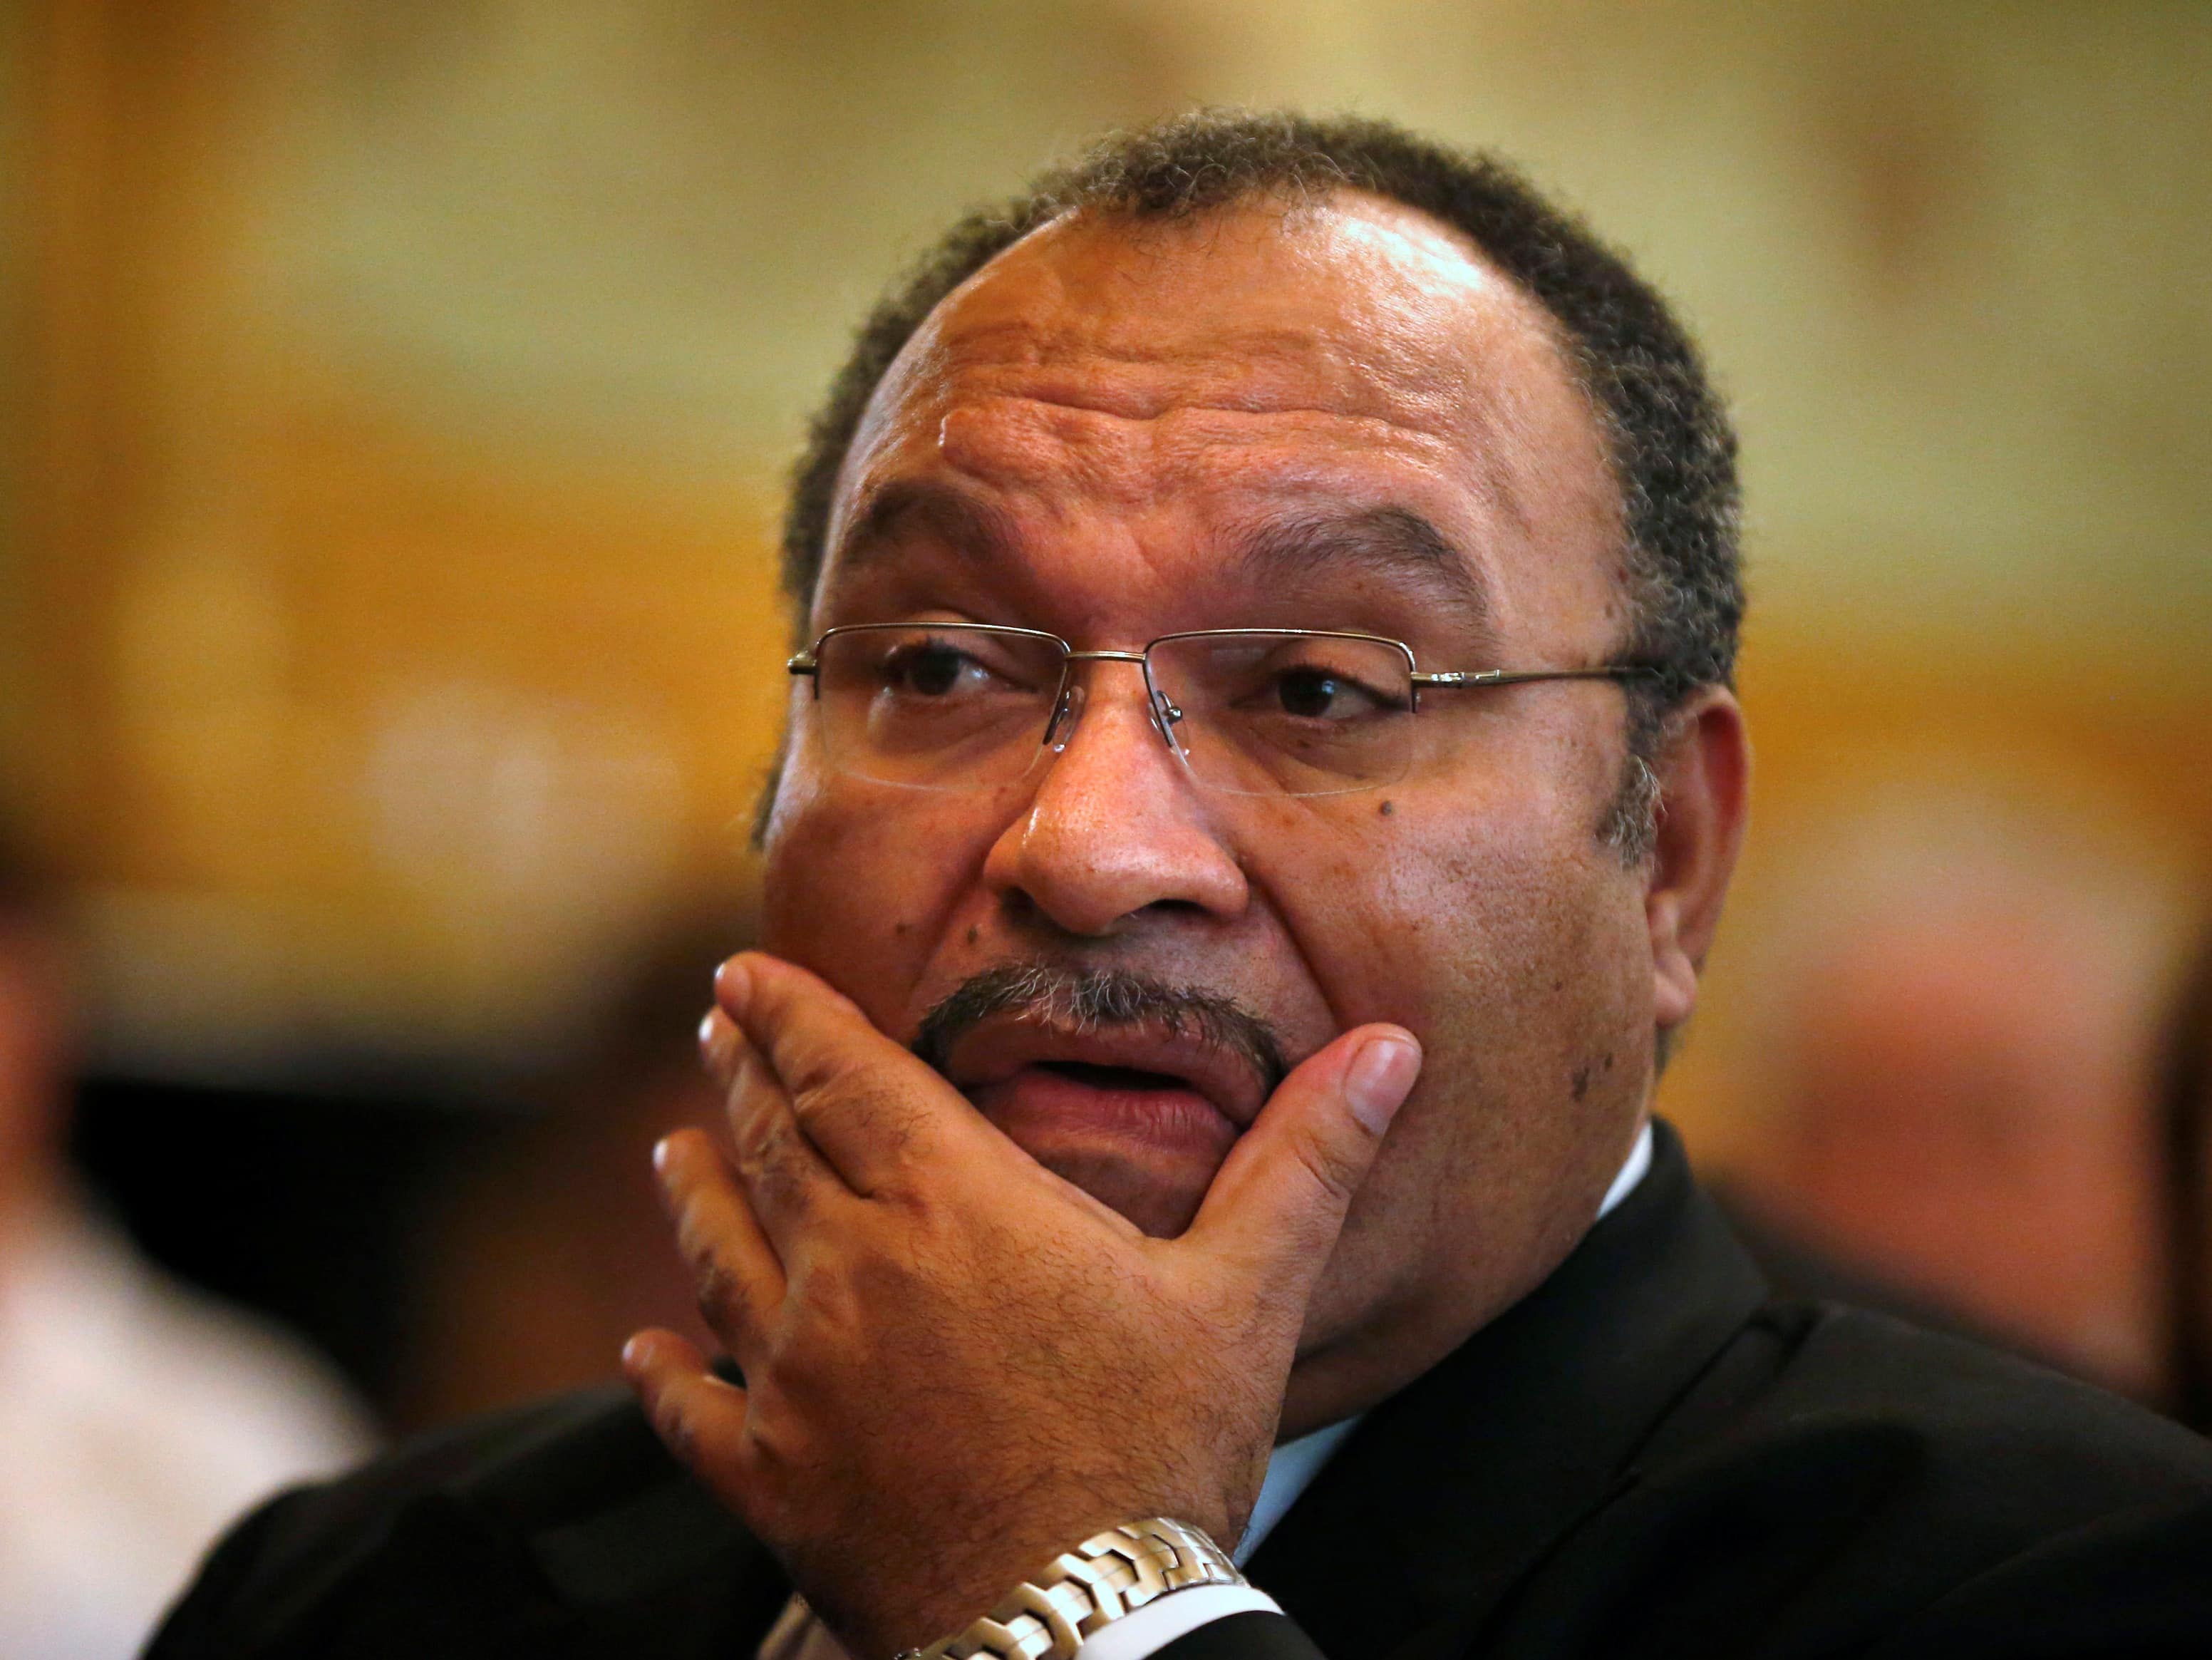 Papua New Guinea's Prime Minister Peter O'Neill pauses before making an address in Sydney, 29 November 2012, REUTERS/Tim Wimborne